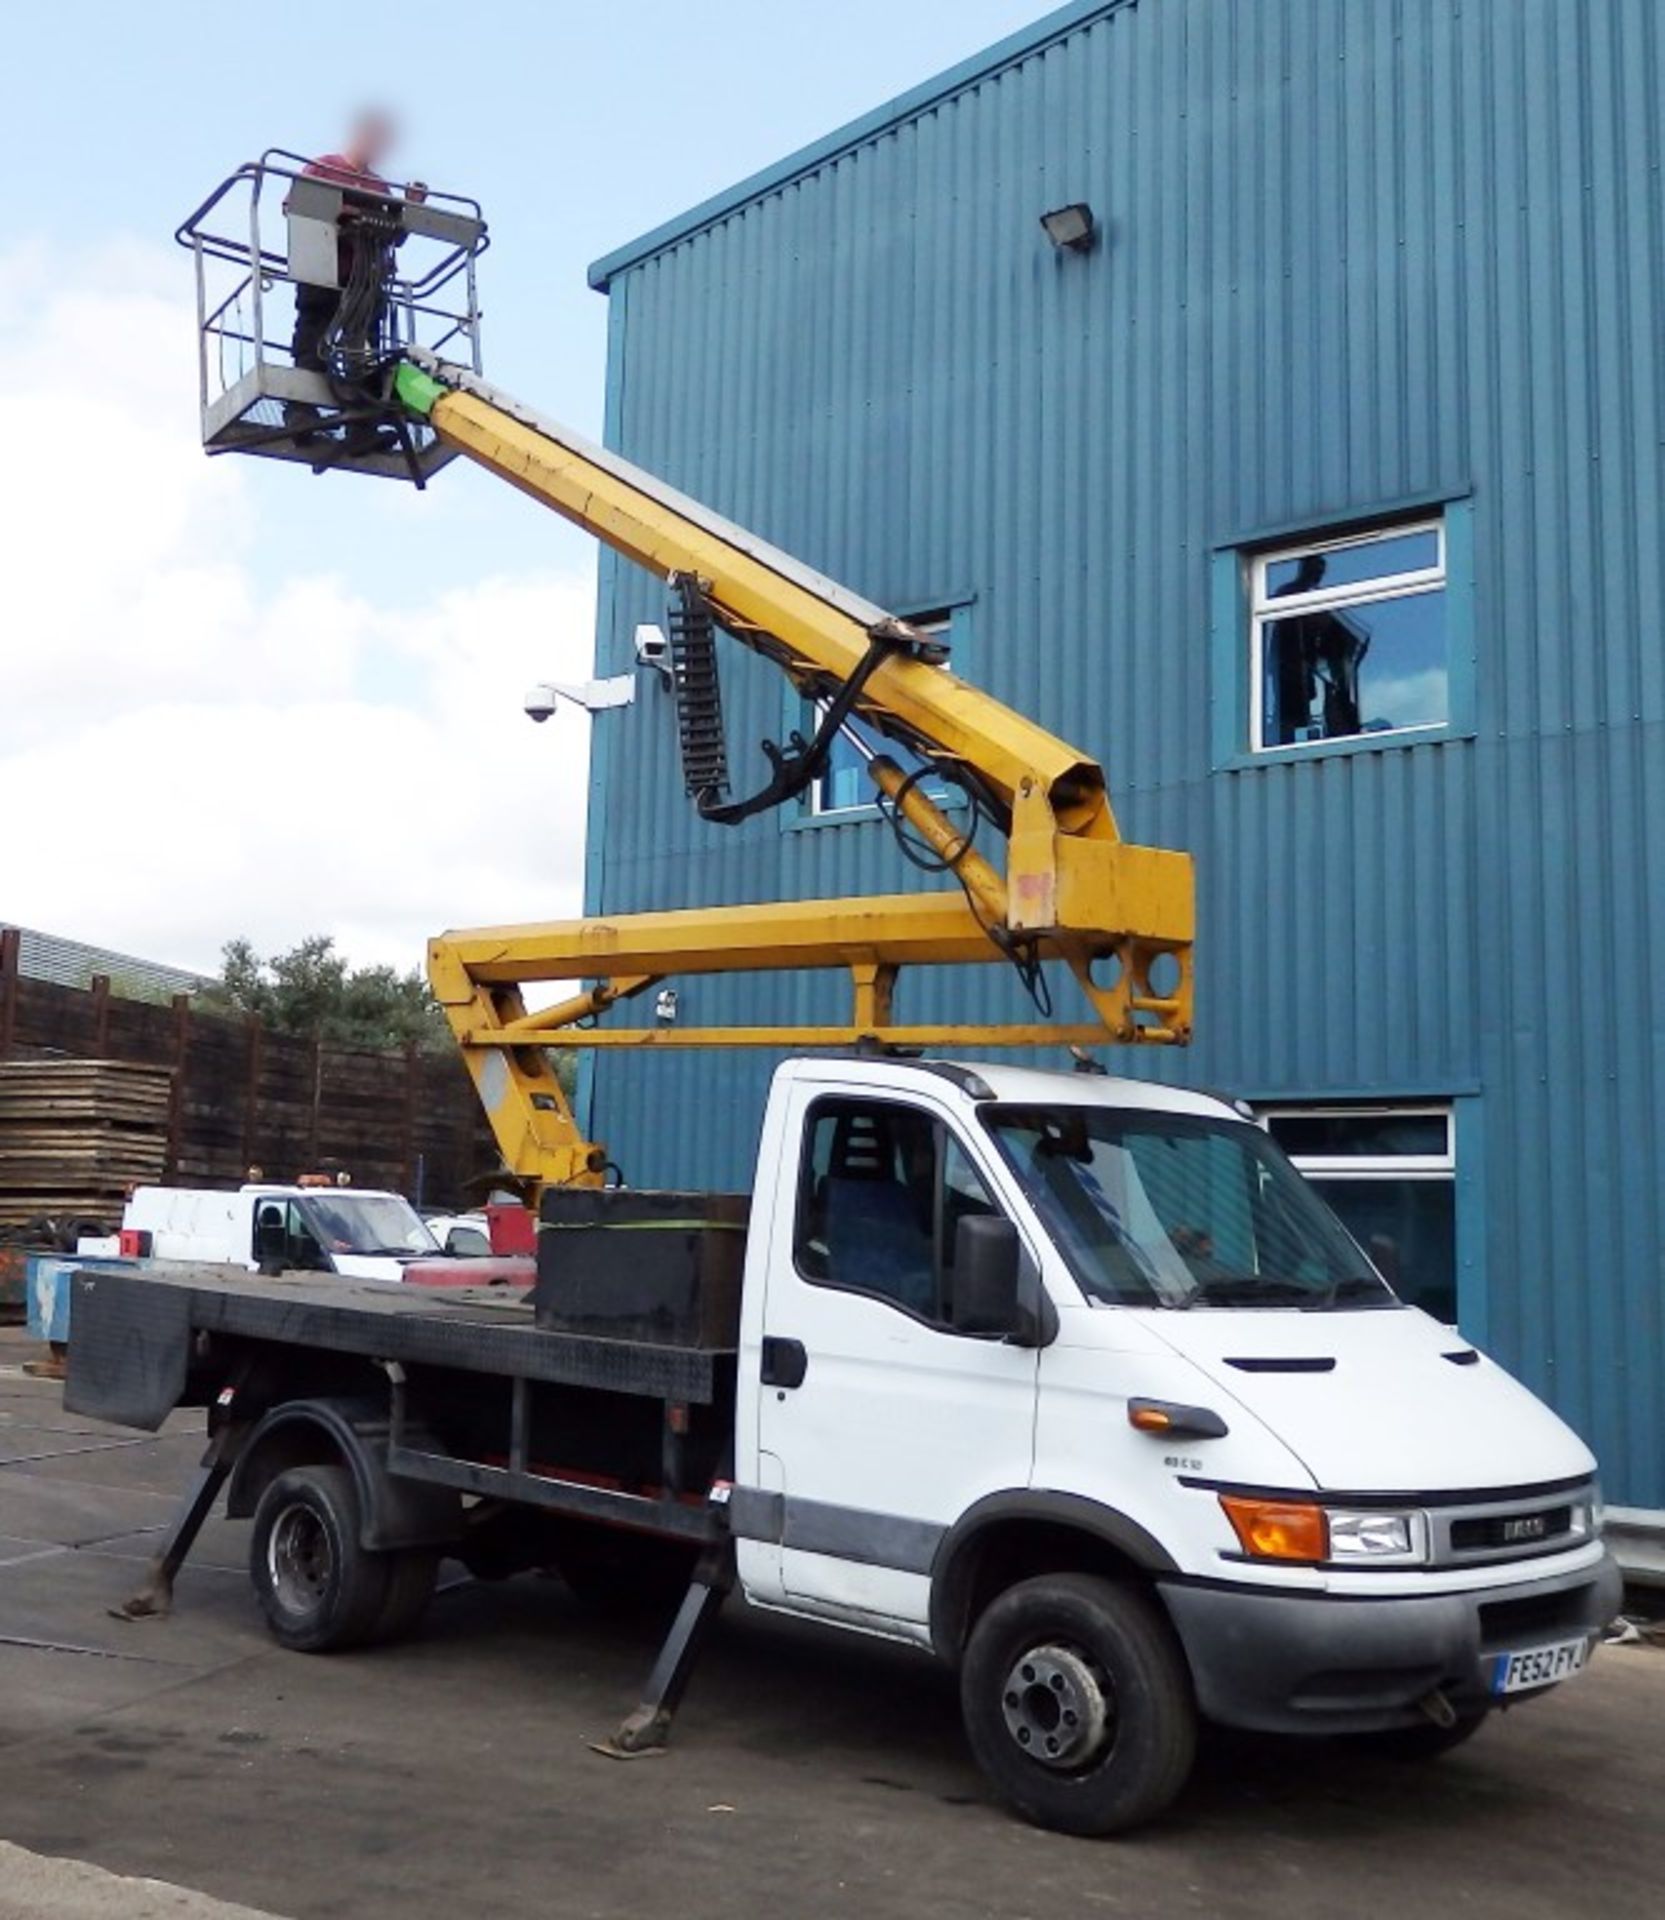 1 x 2002 (52 Reg) White Iveco Transit 65C15 Crane / Cherry Picker With Outstanding Reach and 2 Man